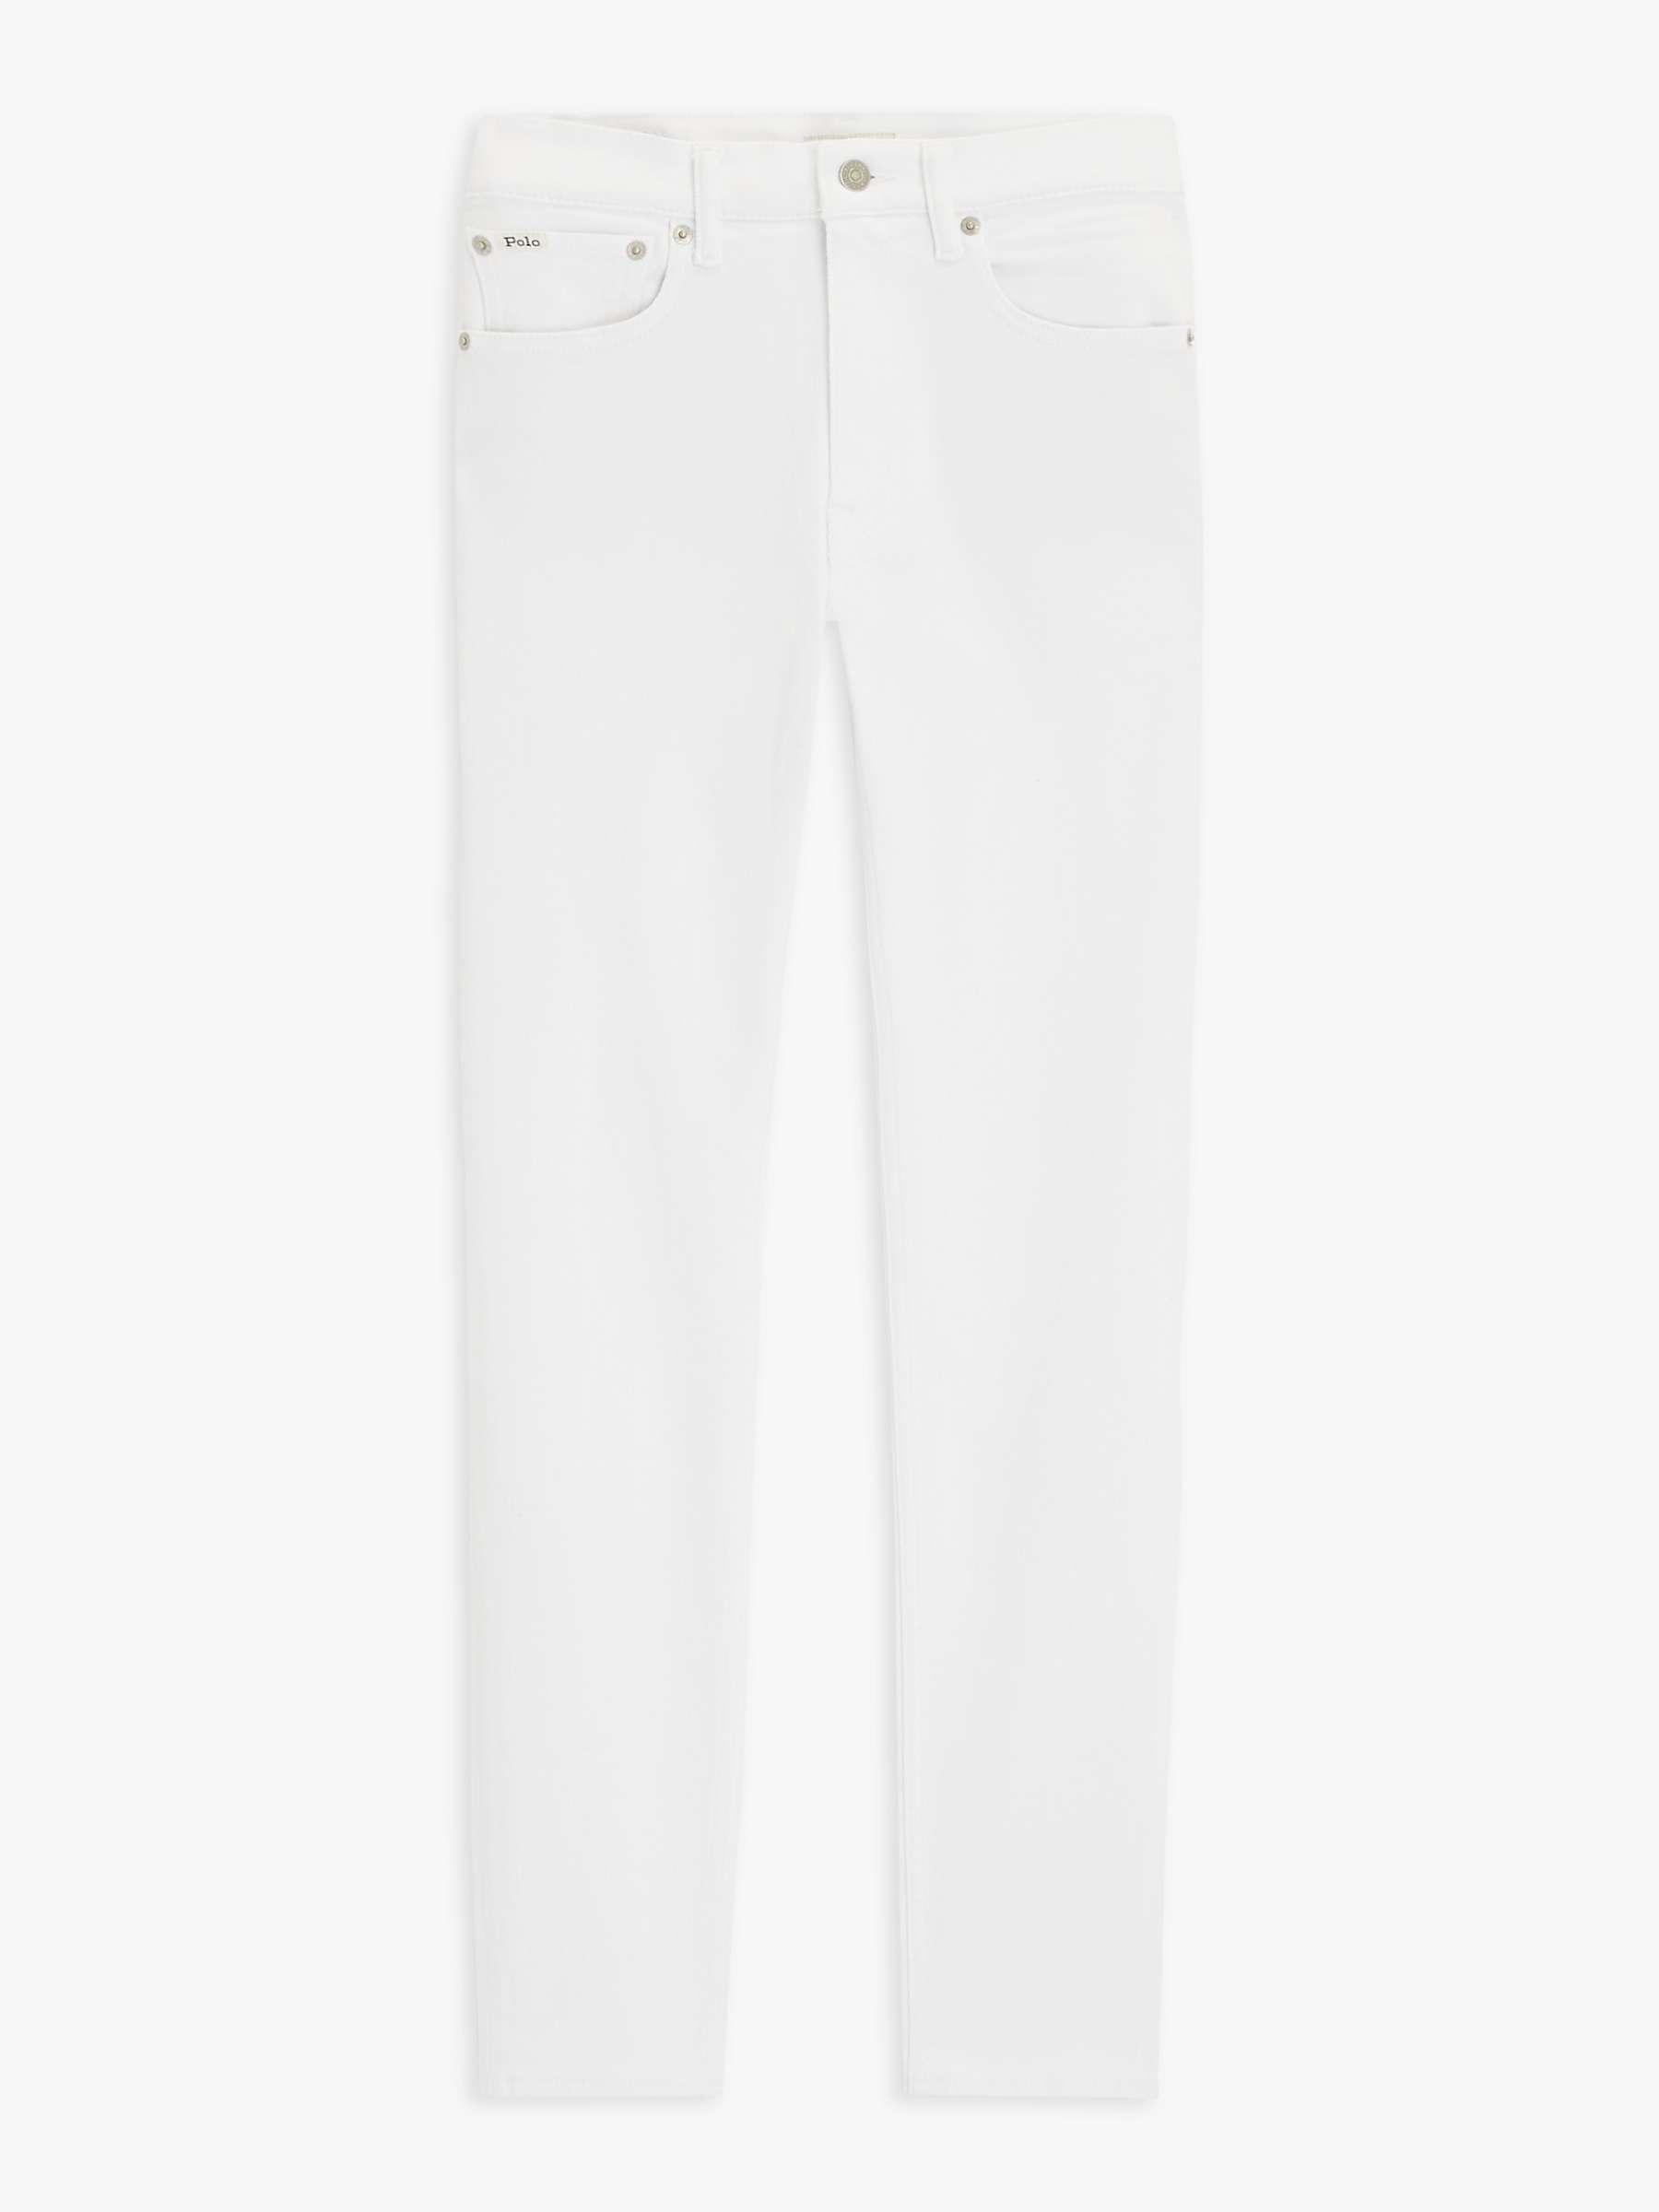 Buy Polo Ralph Lauren Mid Rise Skinny Jeans, Amesbury Wash Online at johnlewis.com